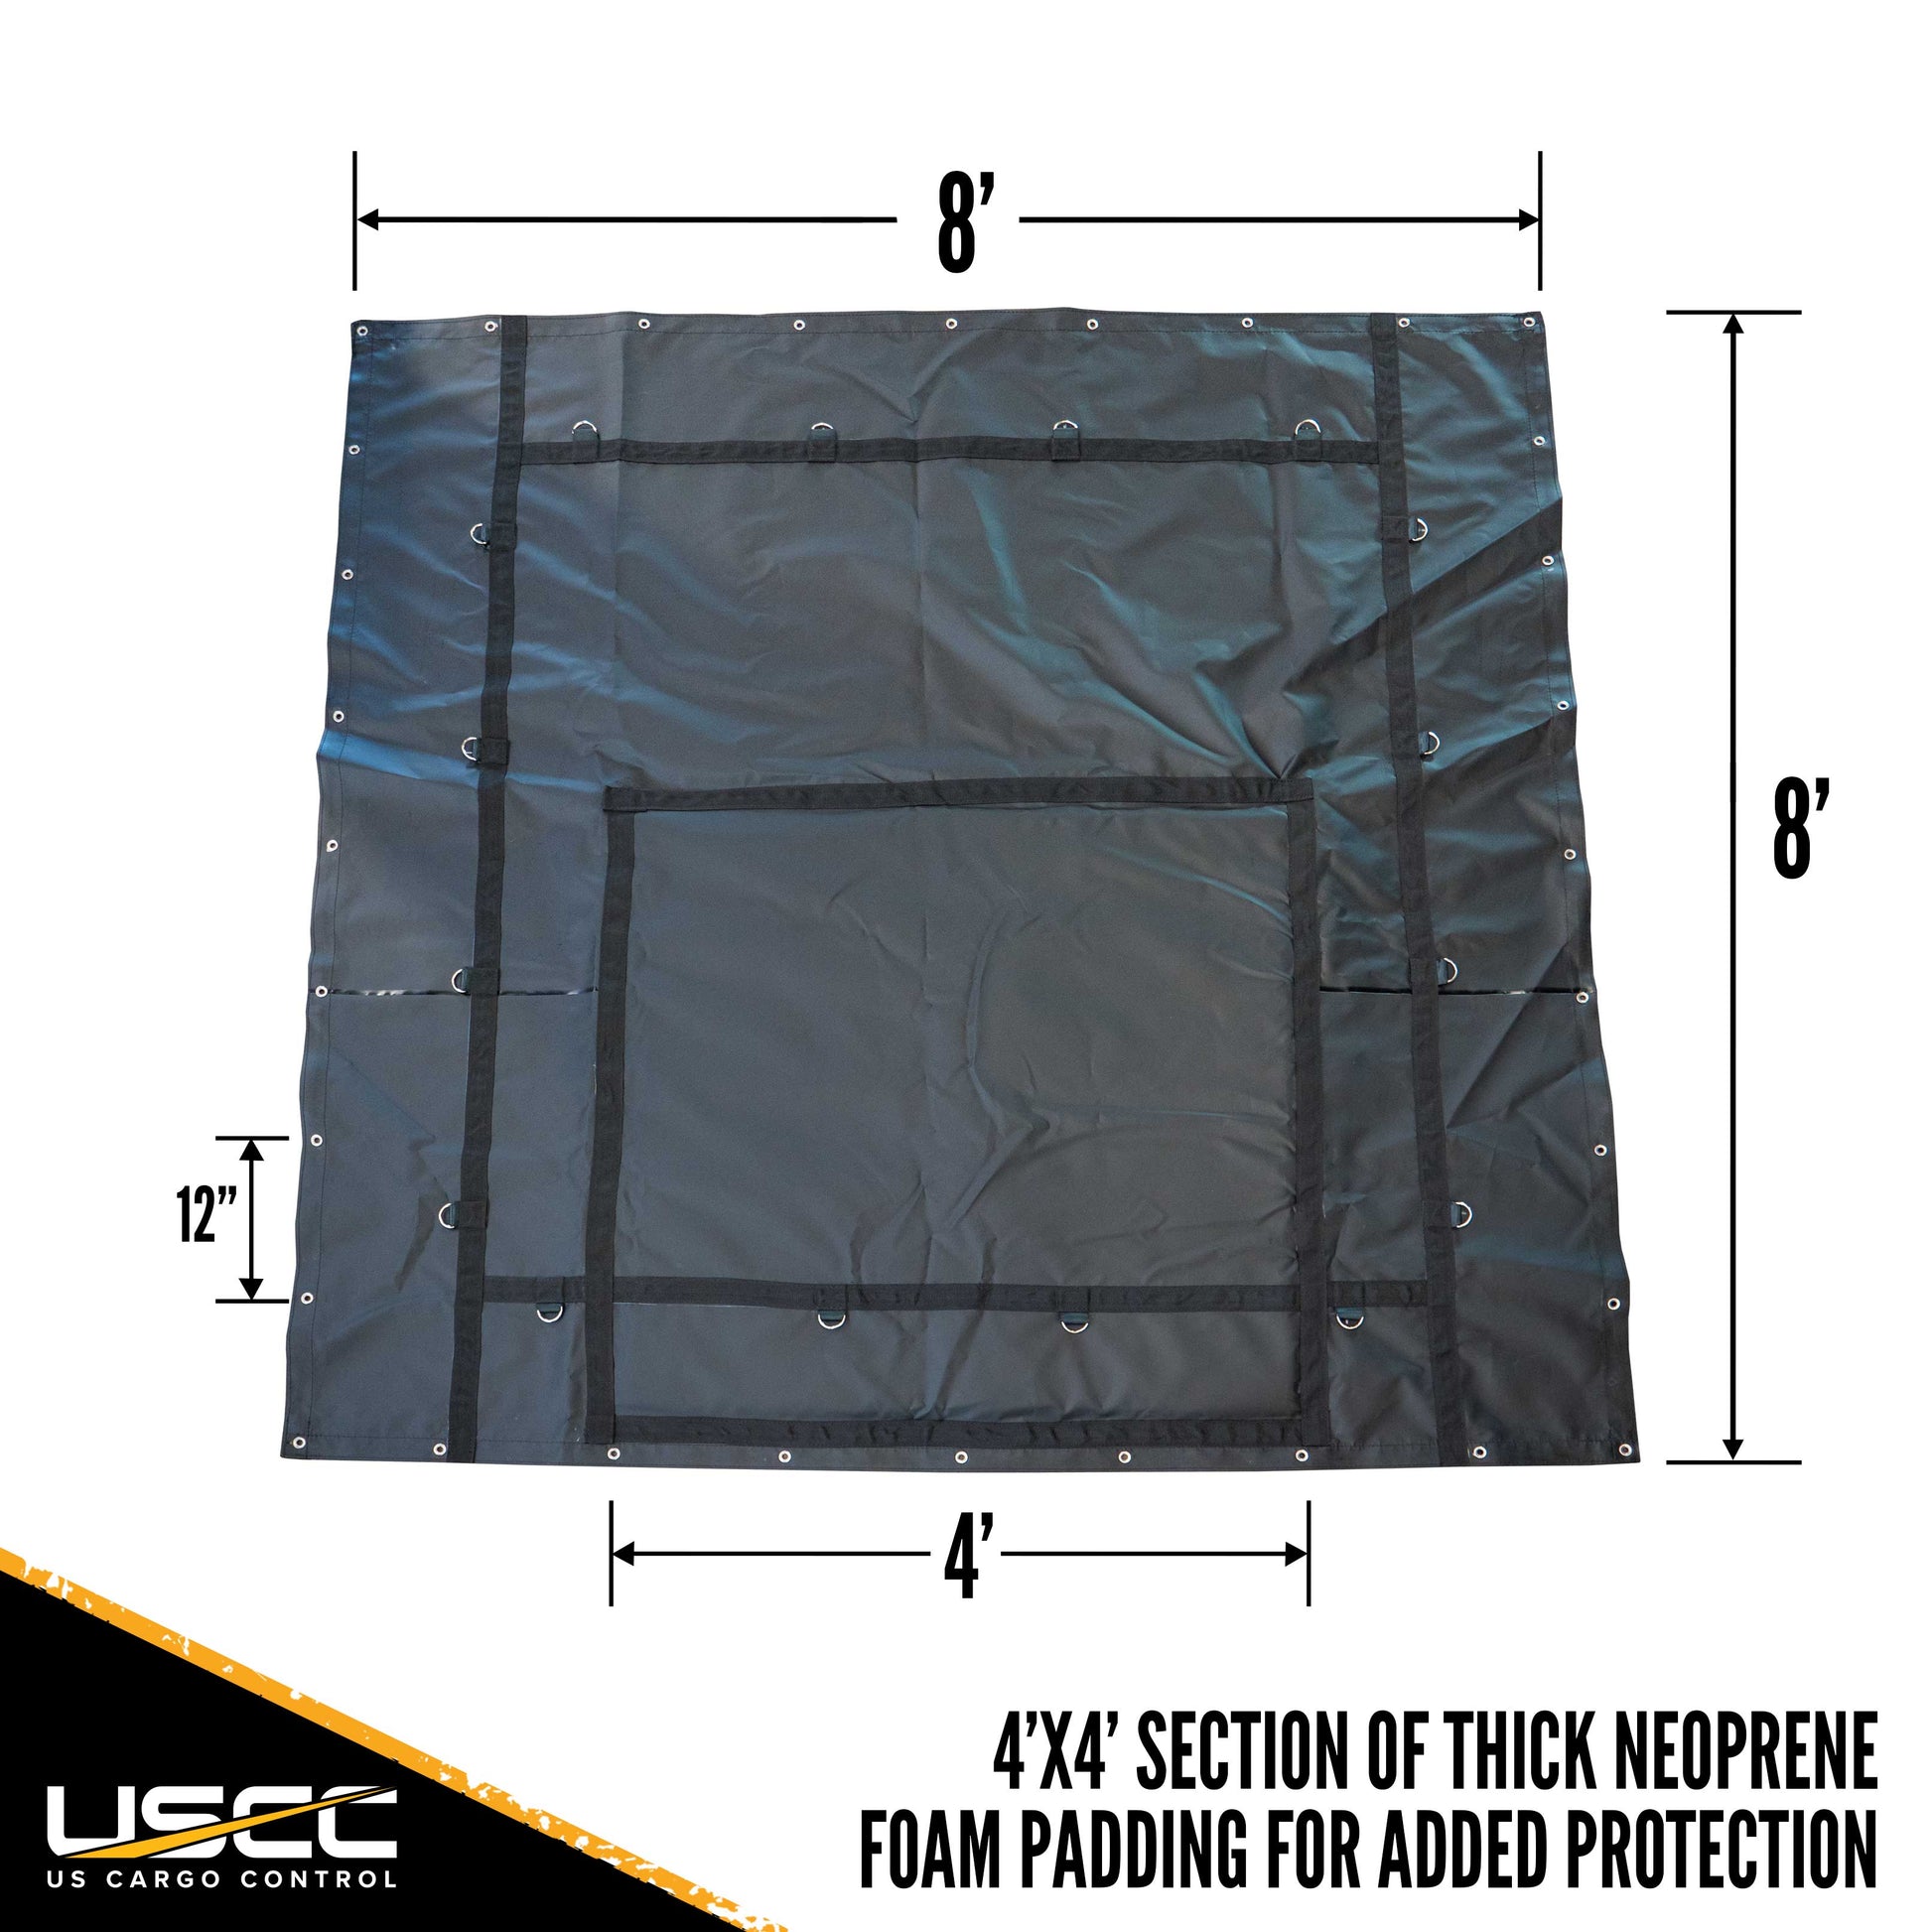 Padded Windshield Covers for UTVs